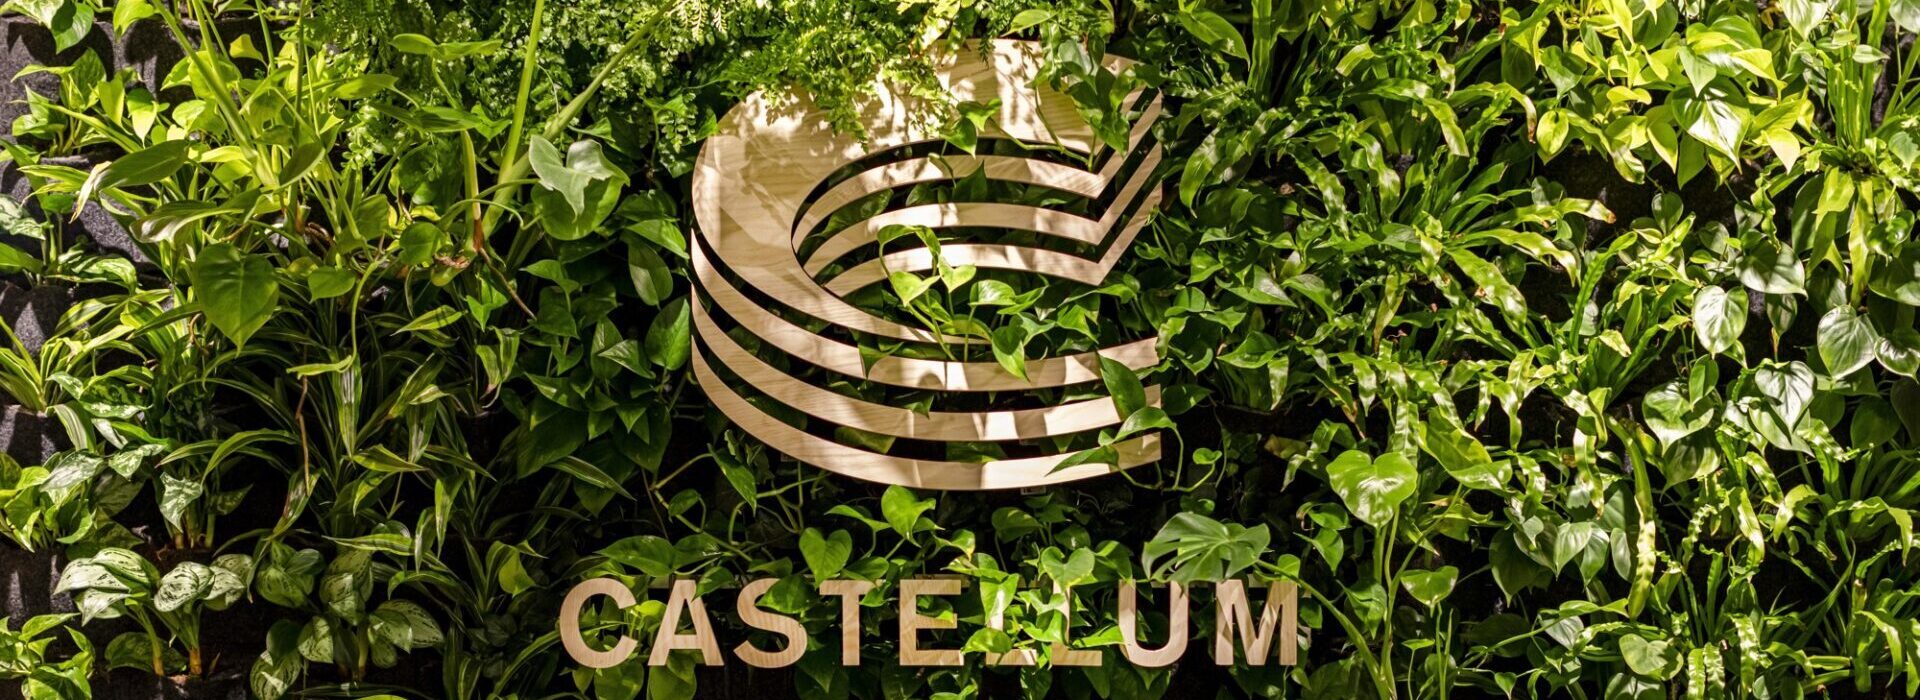 Castellum-D4A8356-plant wall with the Castellum logotype